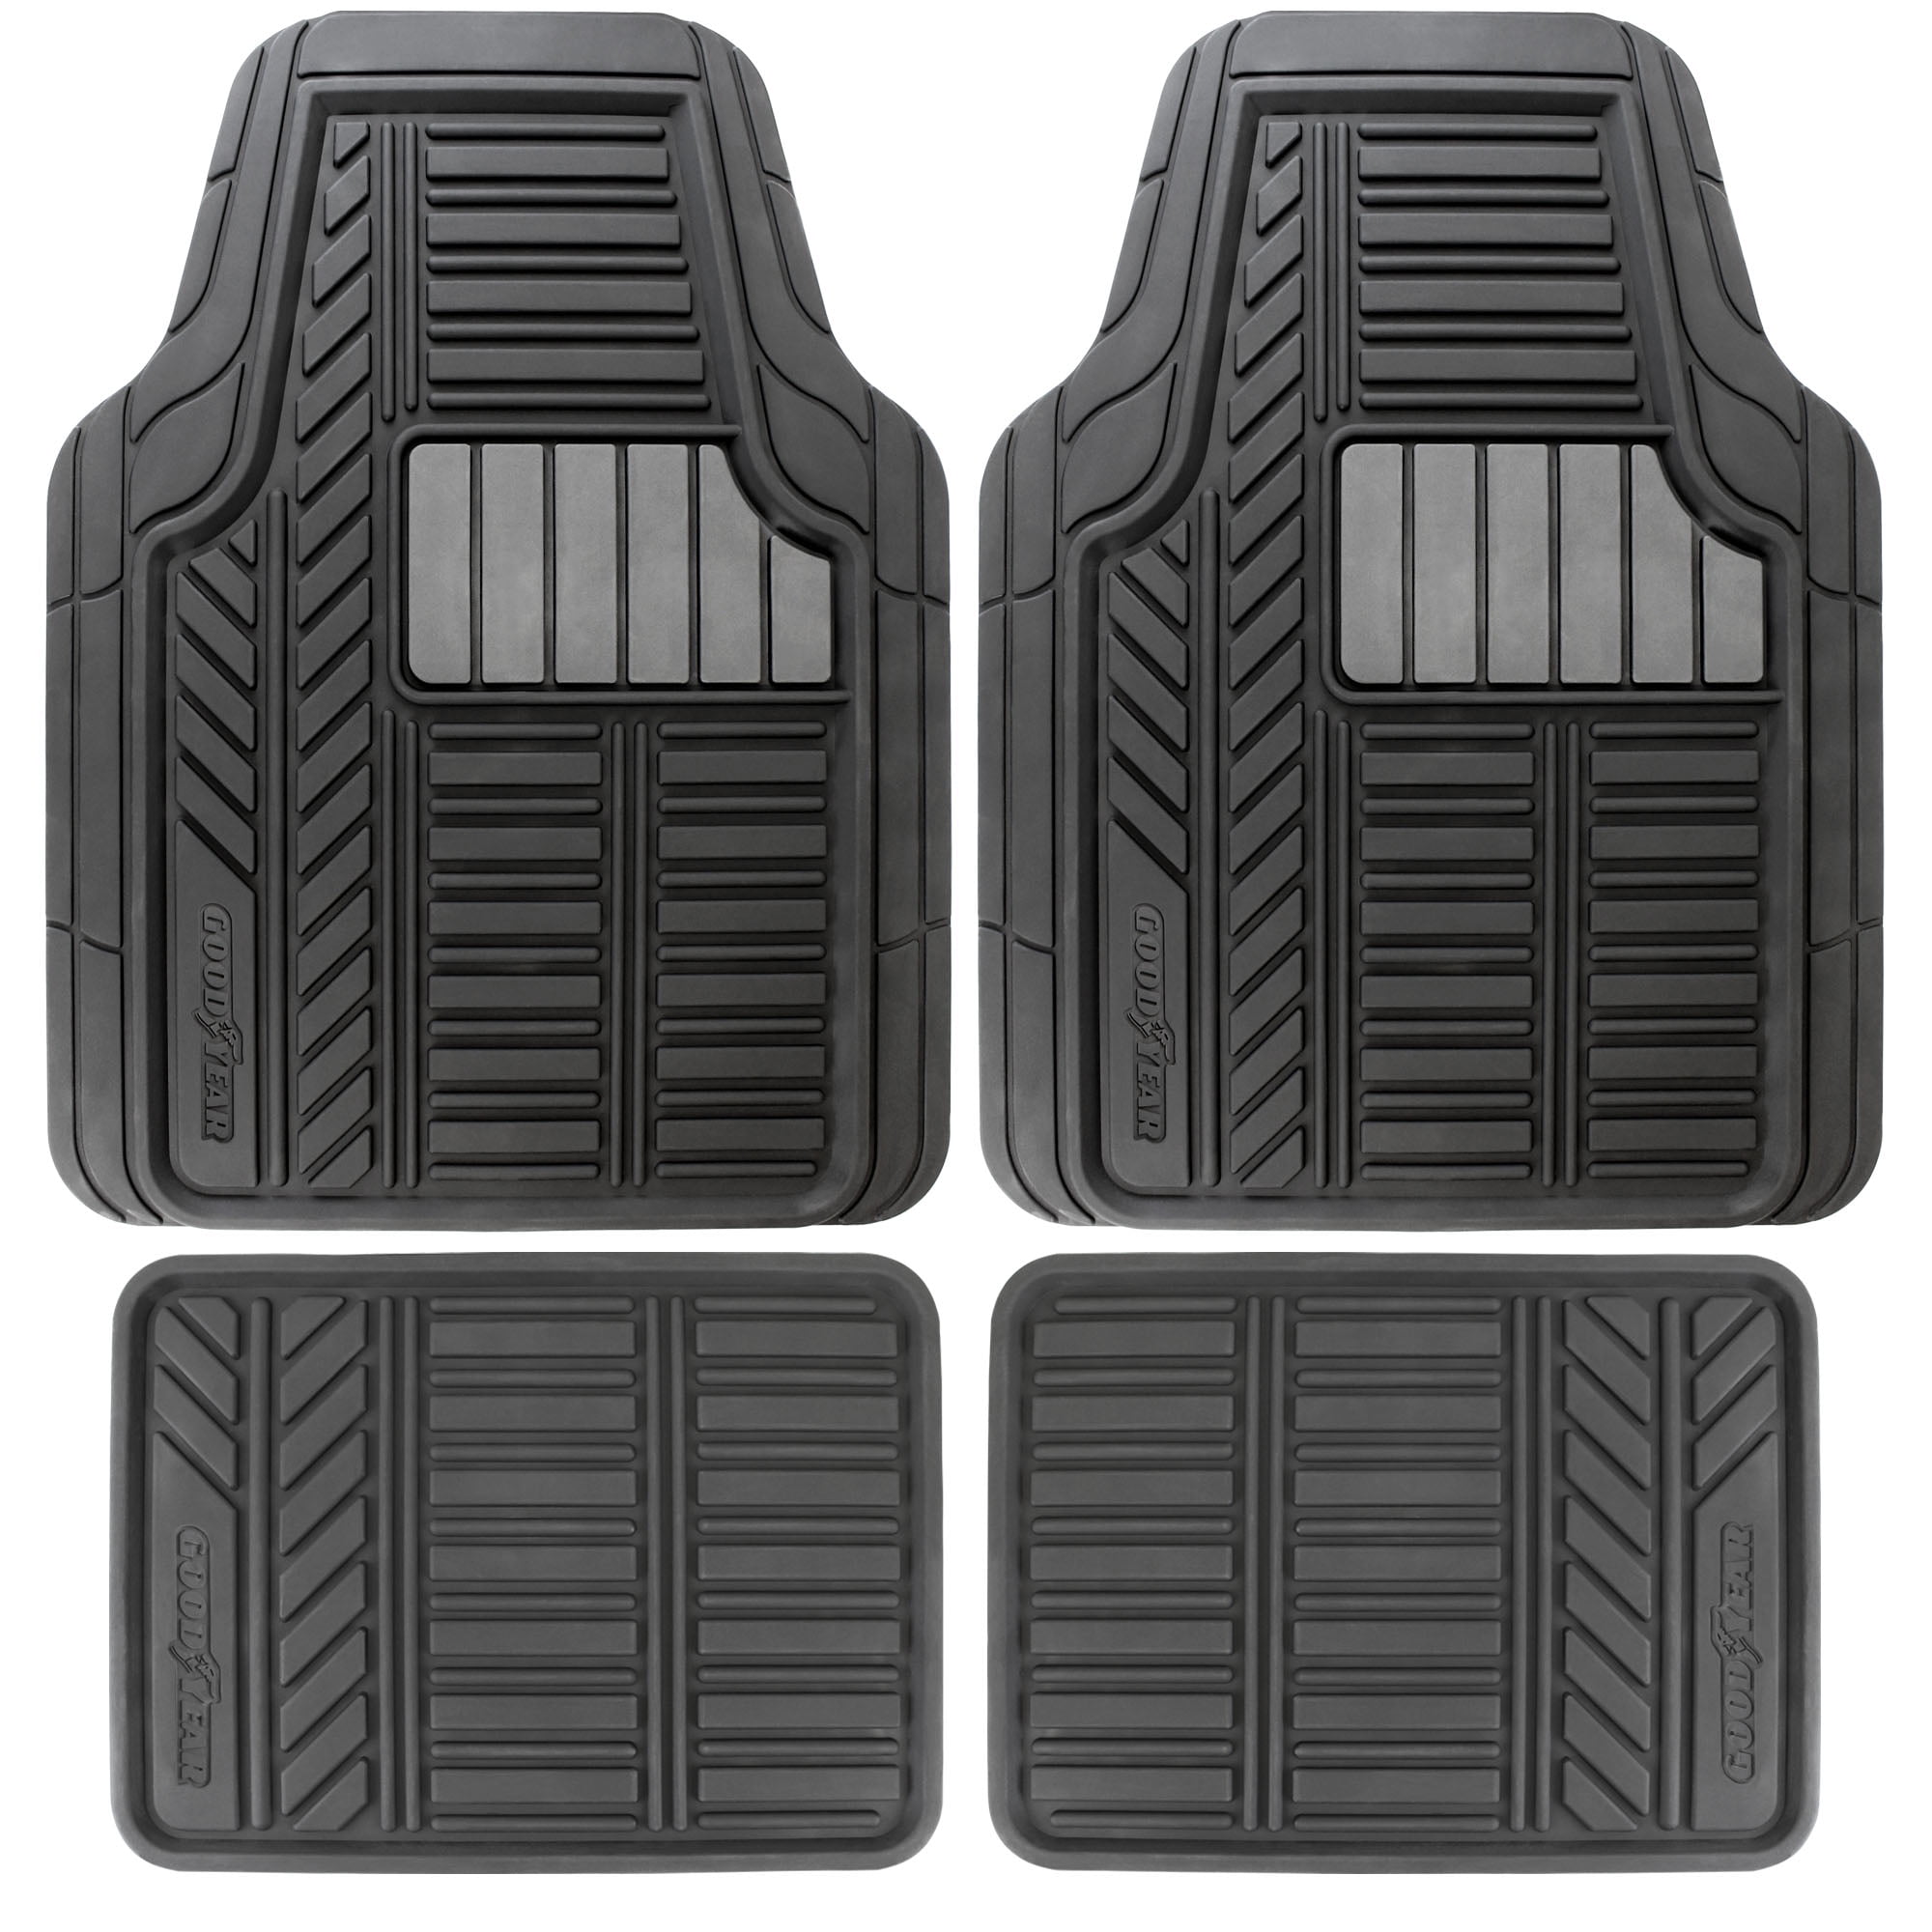 Van SUV PantsSaver Custom Fit Automotive Floor Mats for Volkswagen Touareg 2018 All Weather Protection for Cars Heavy Duty Total Protection Tan Trucks 